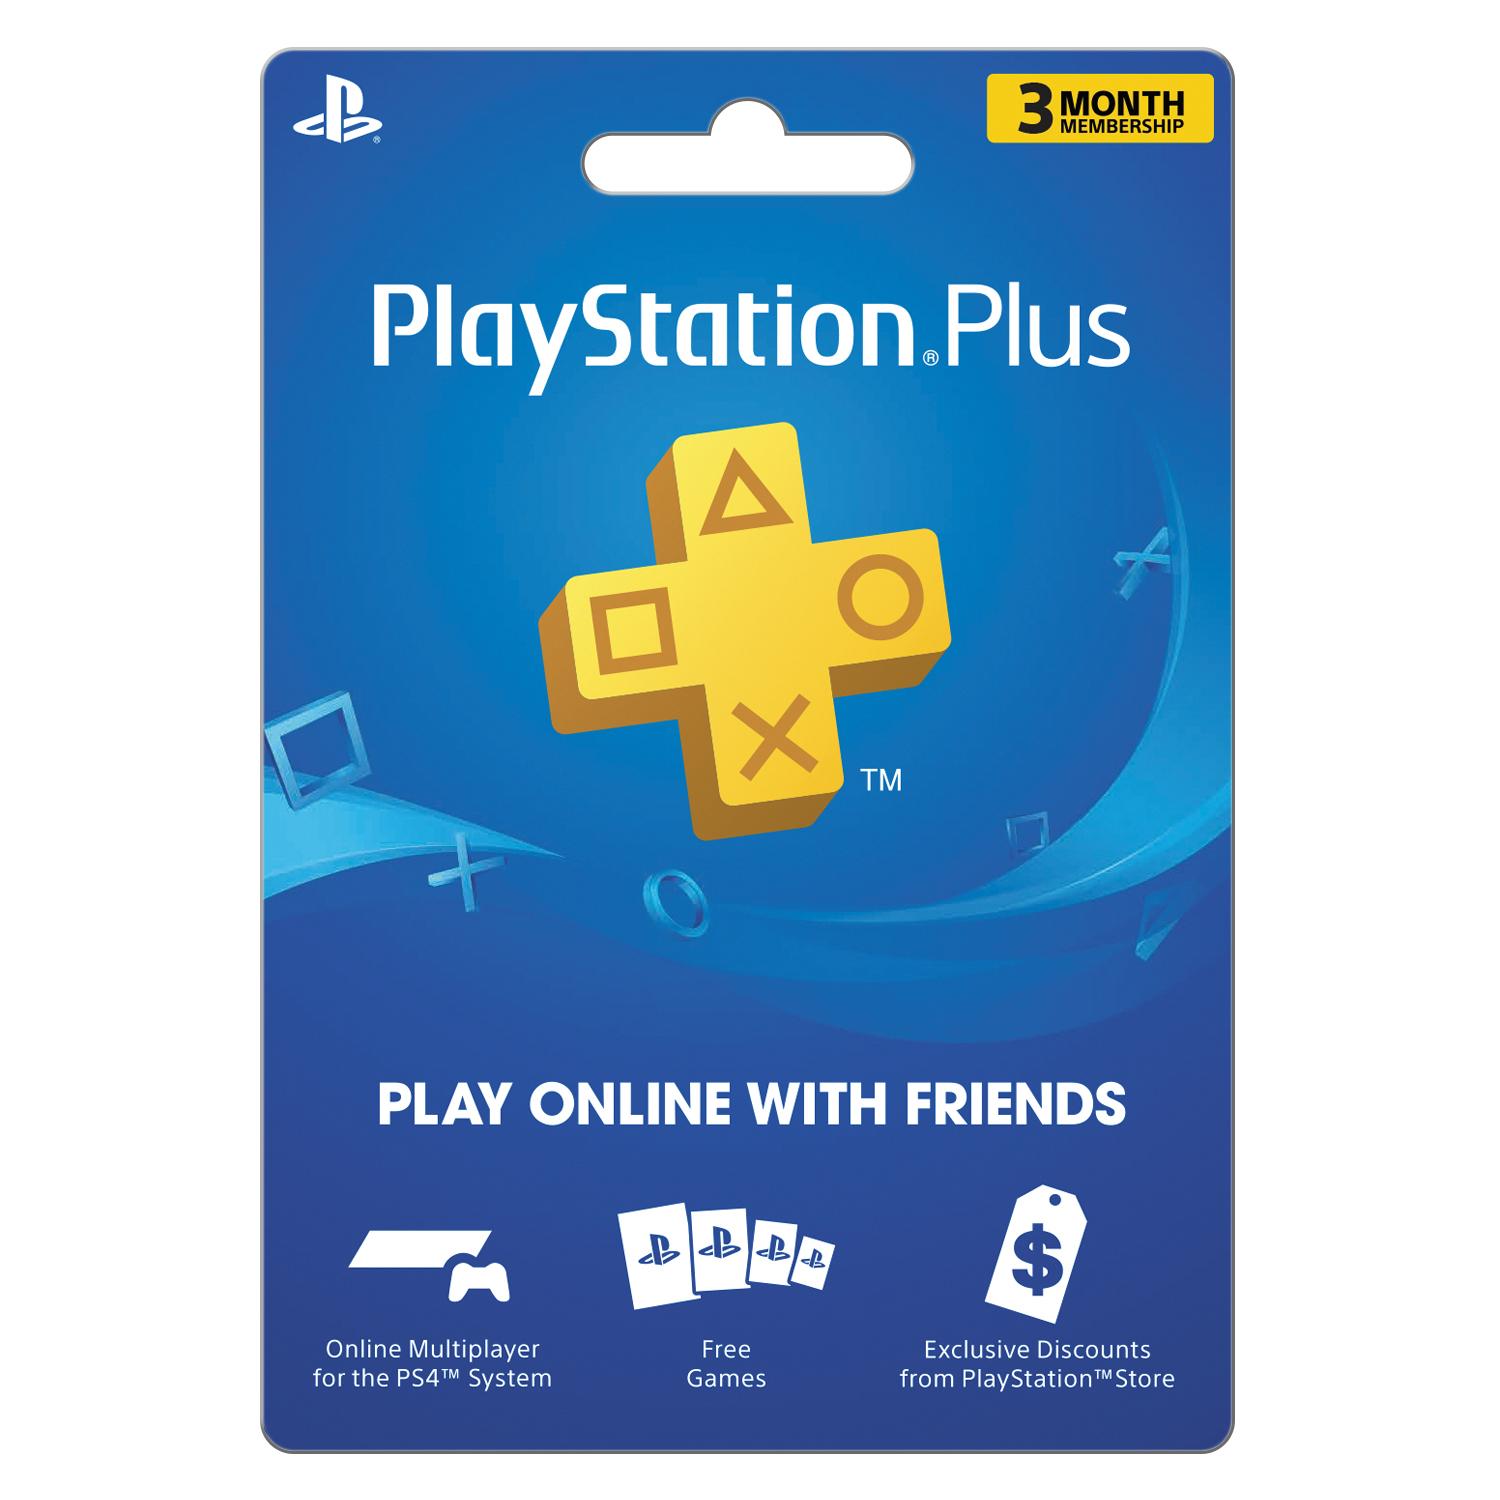 playstation plus ps3 free games